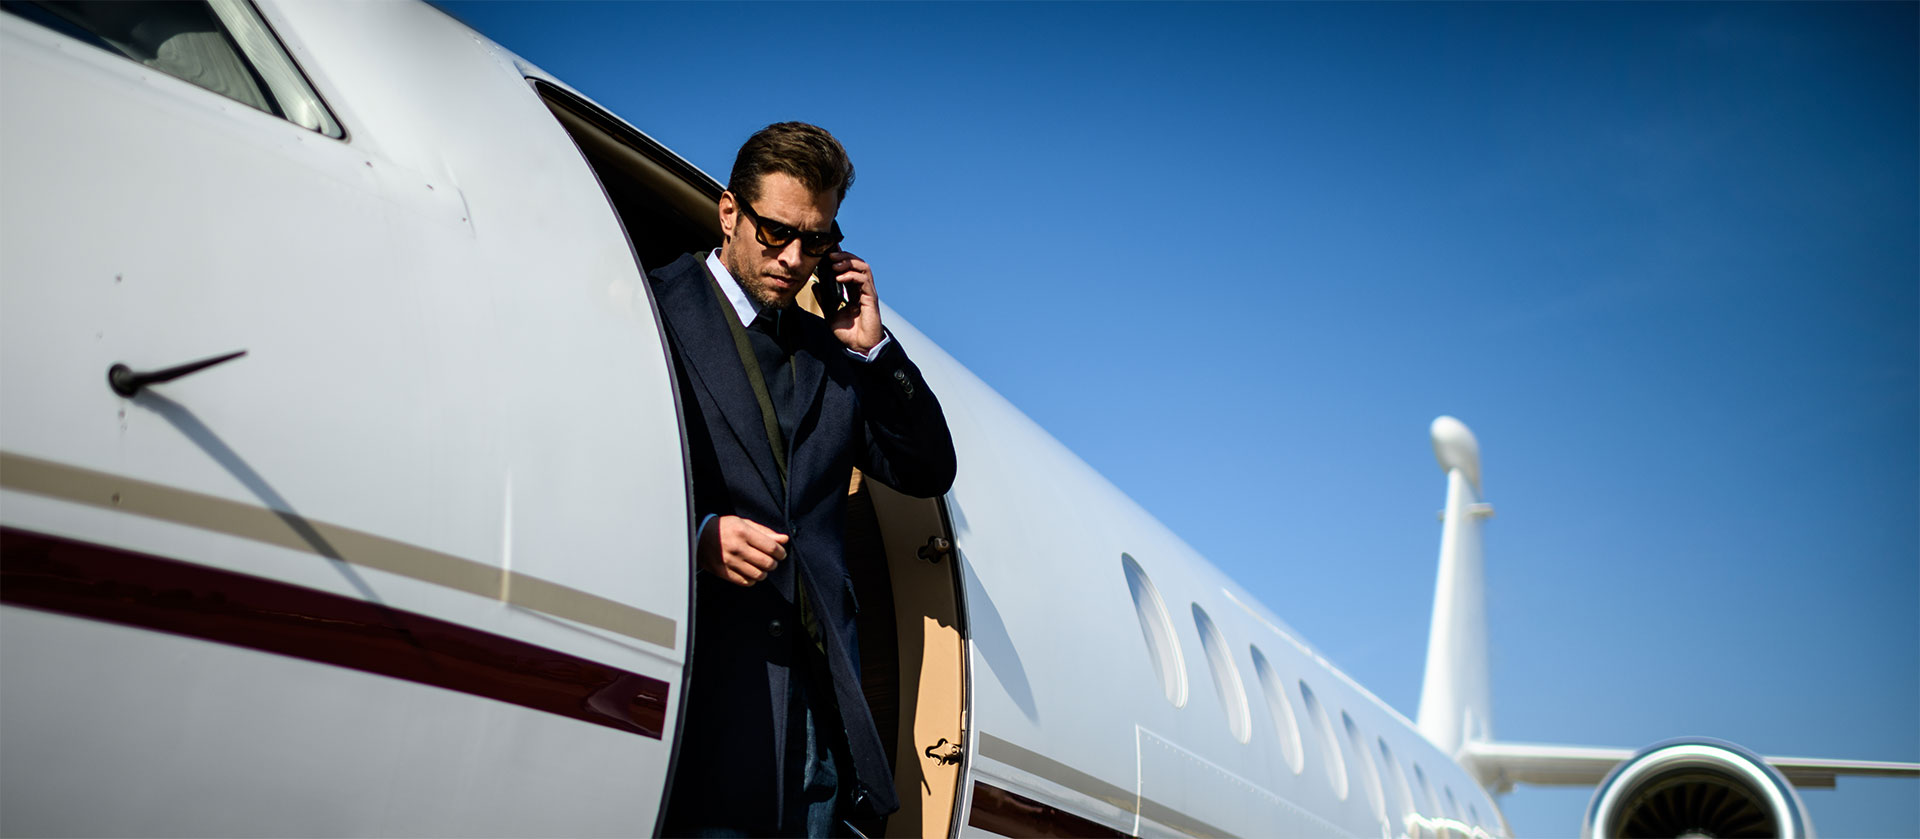 Private Jet Charter Safety - Business man